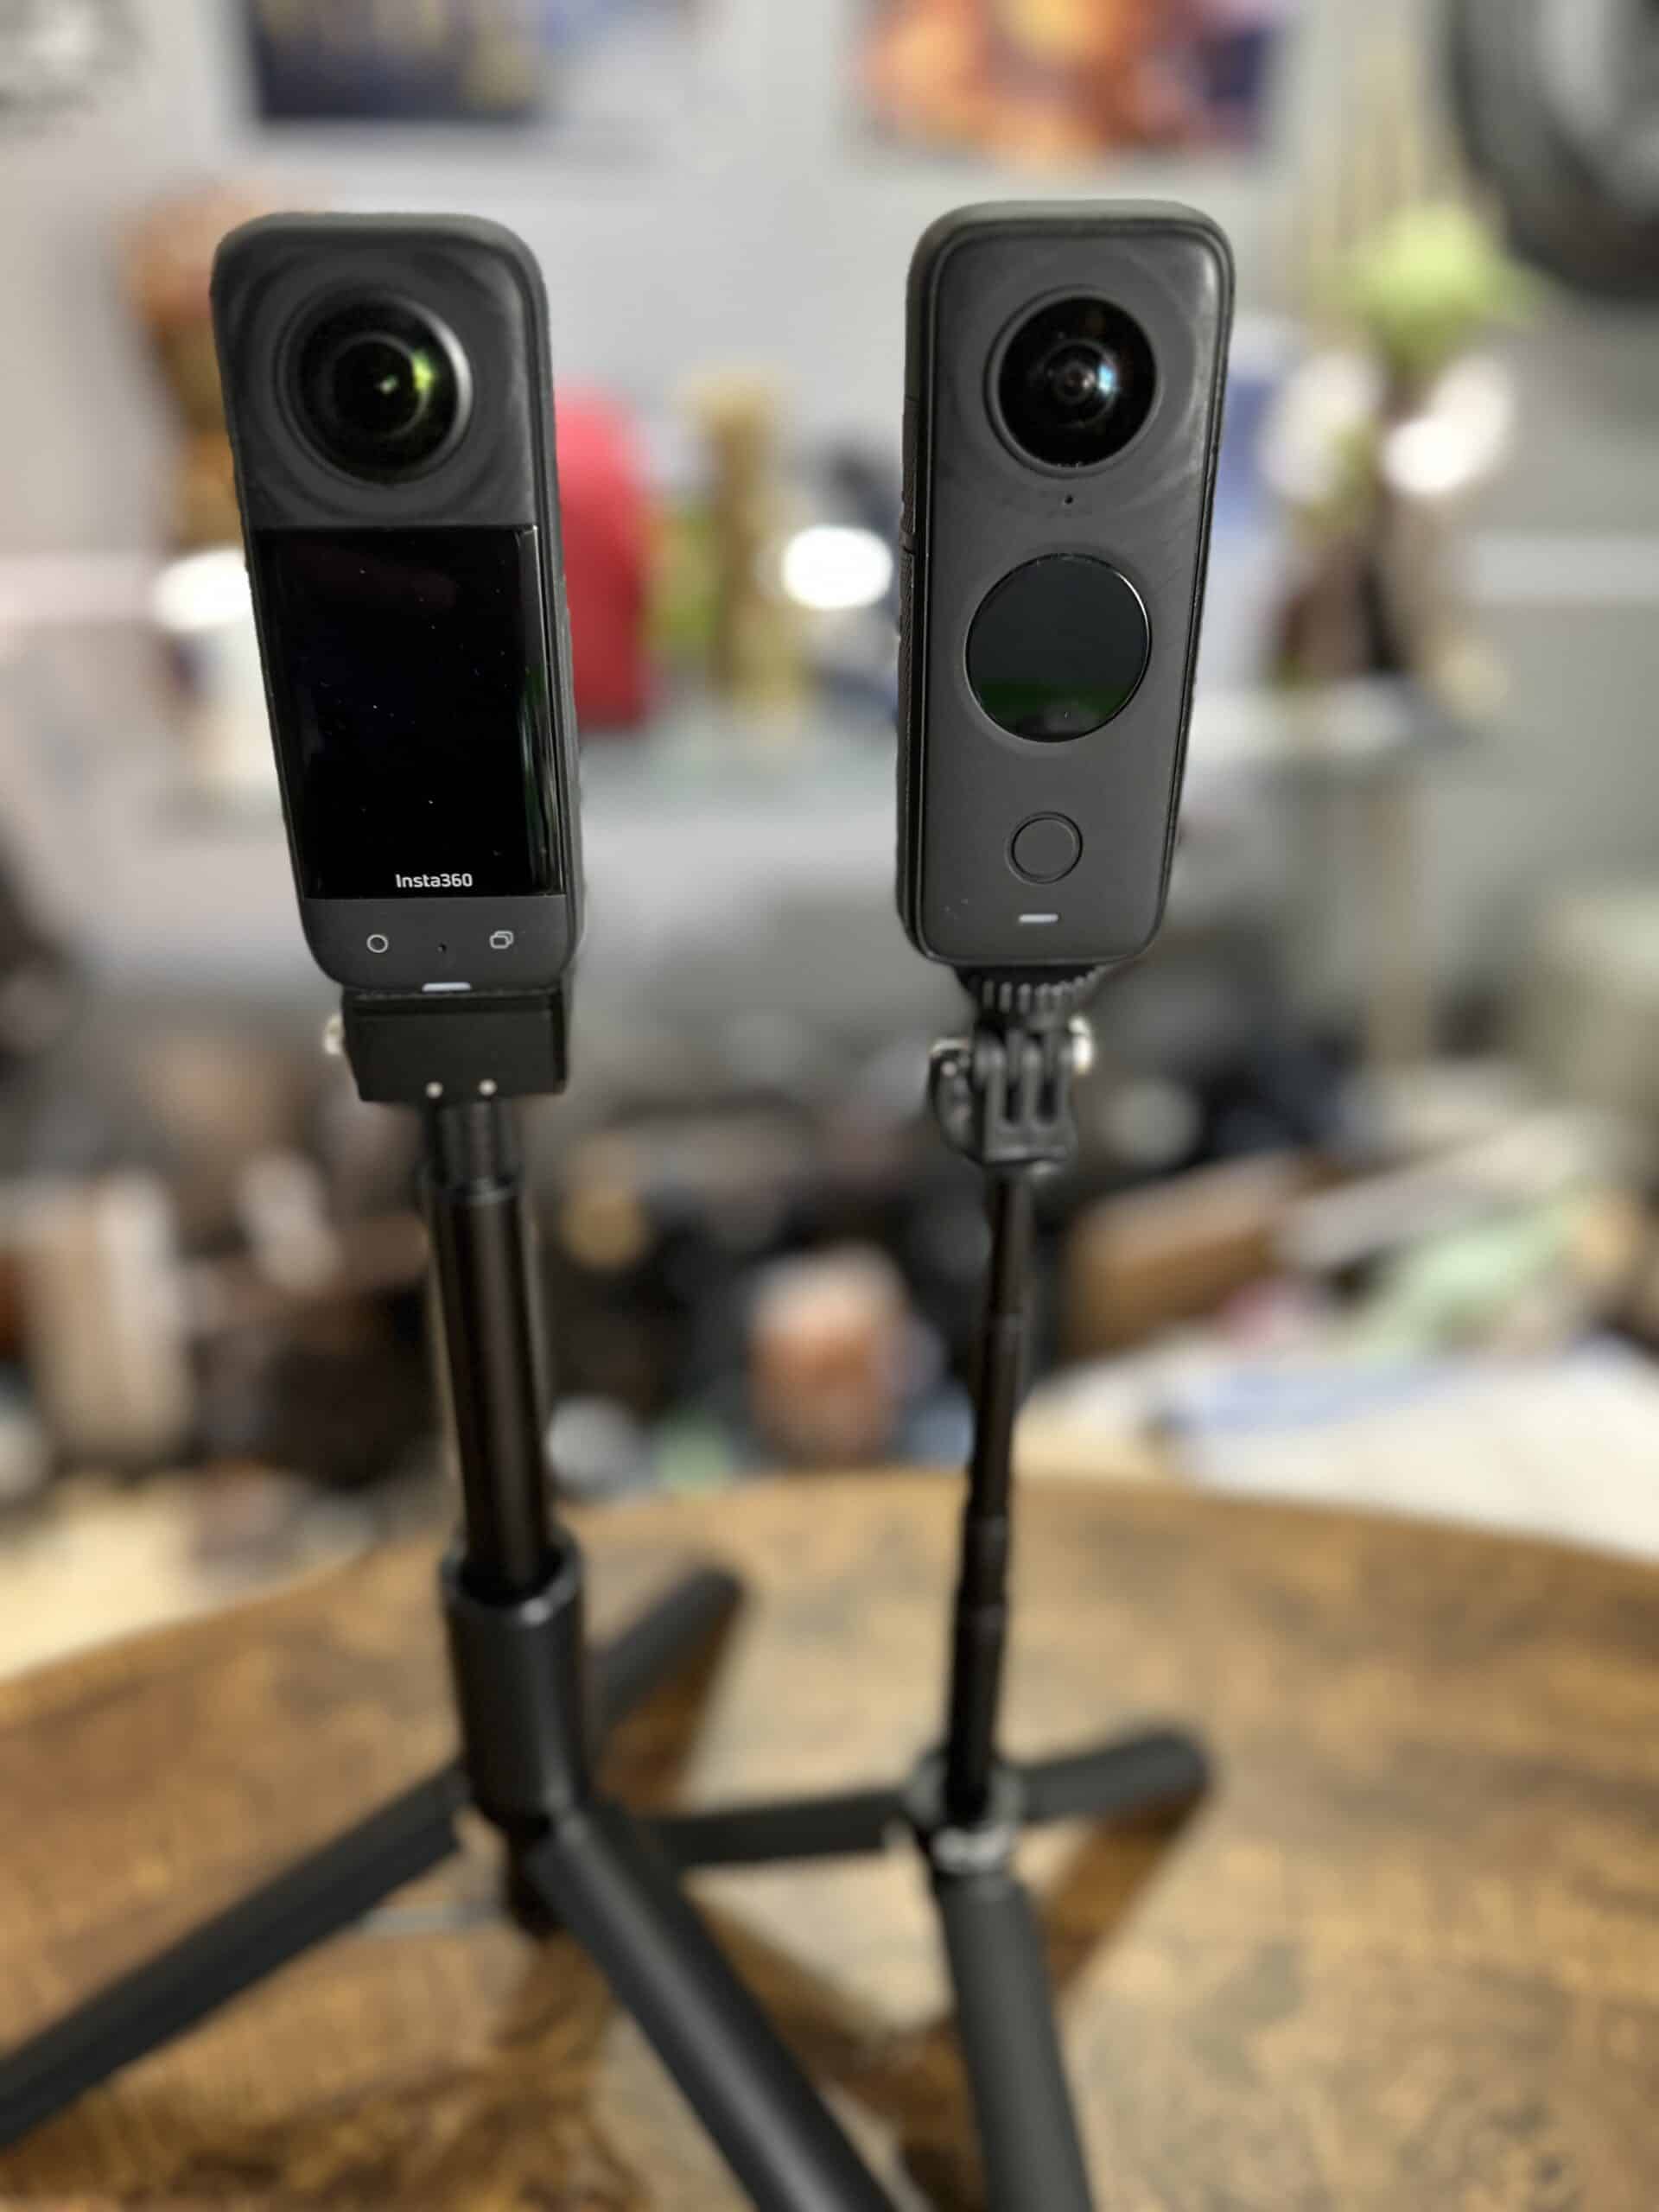 insta360 x2 and x3 360 cameras on invisible selfie sticks and tripods: should you get these now or wait for the Insta360 x4?